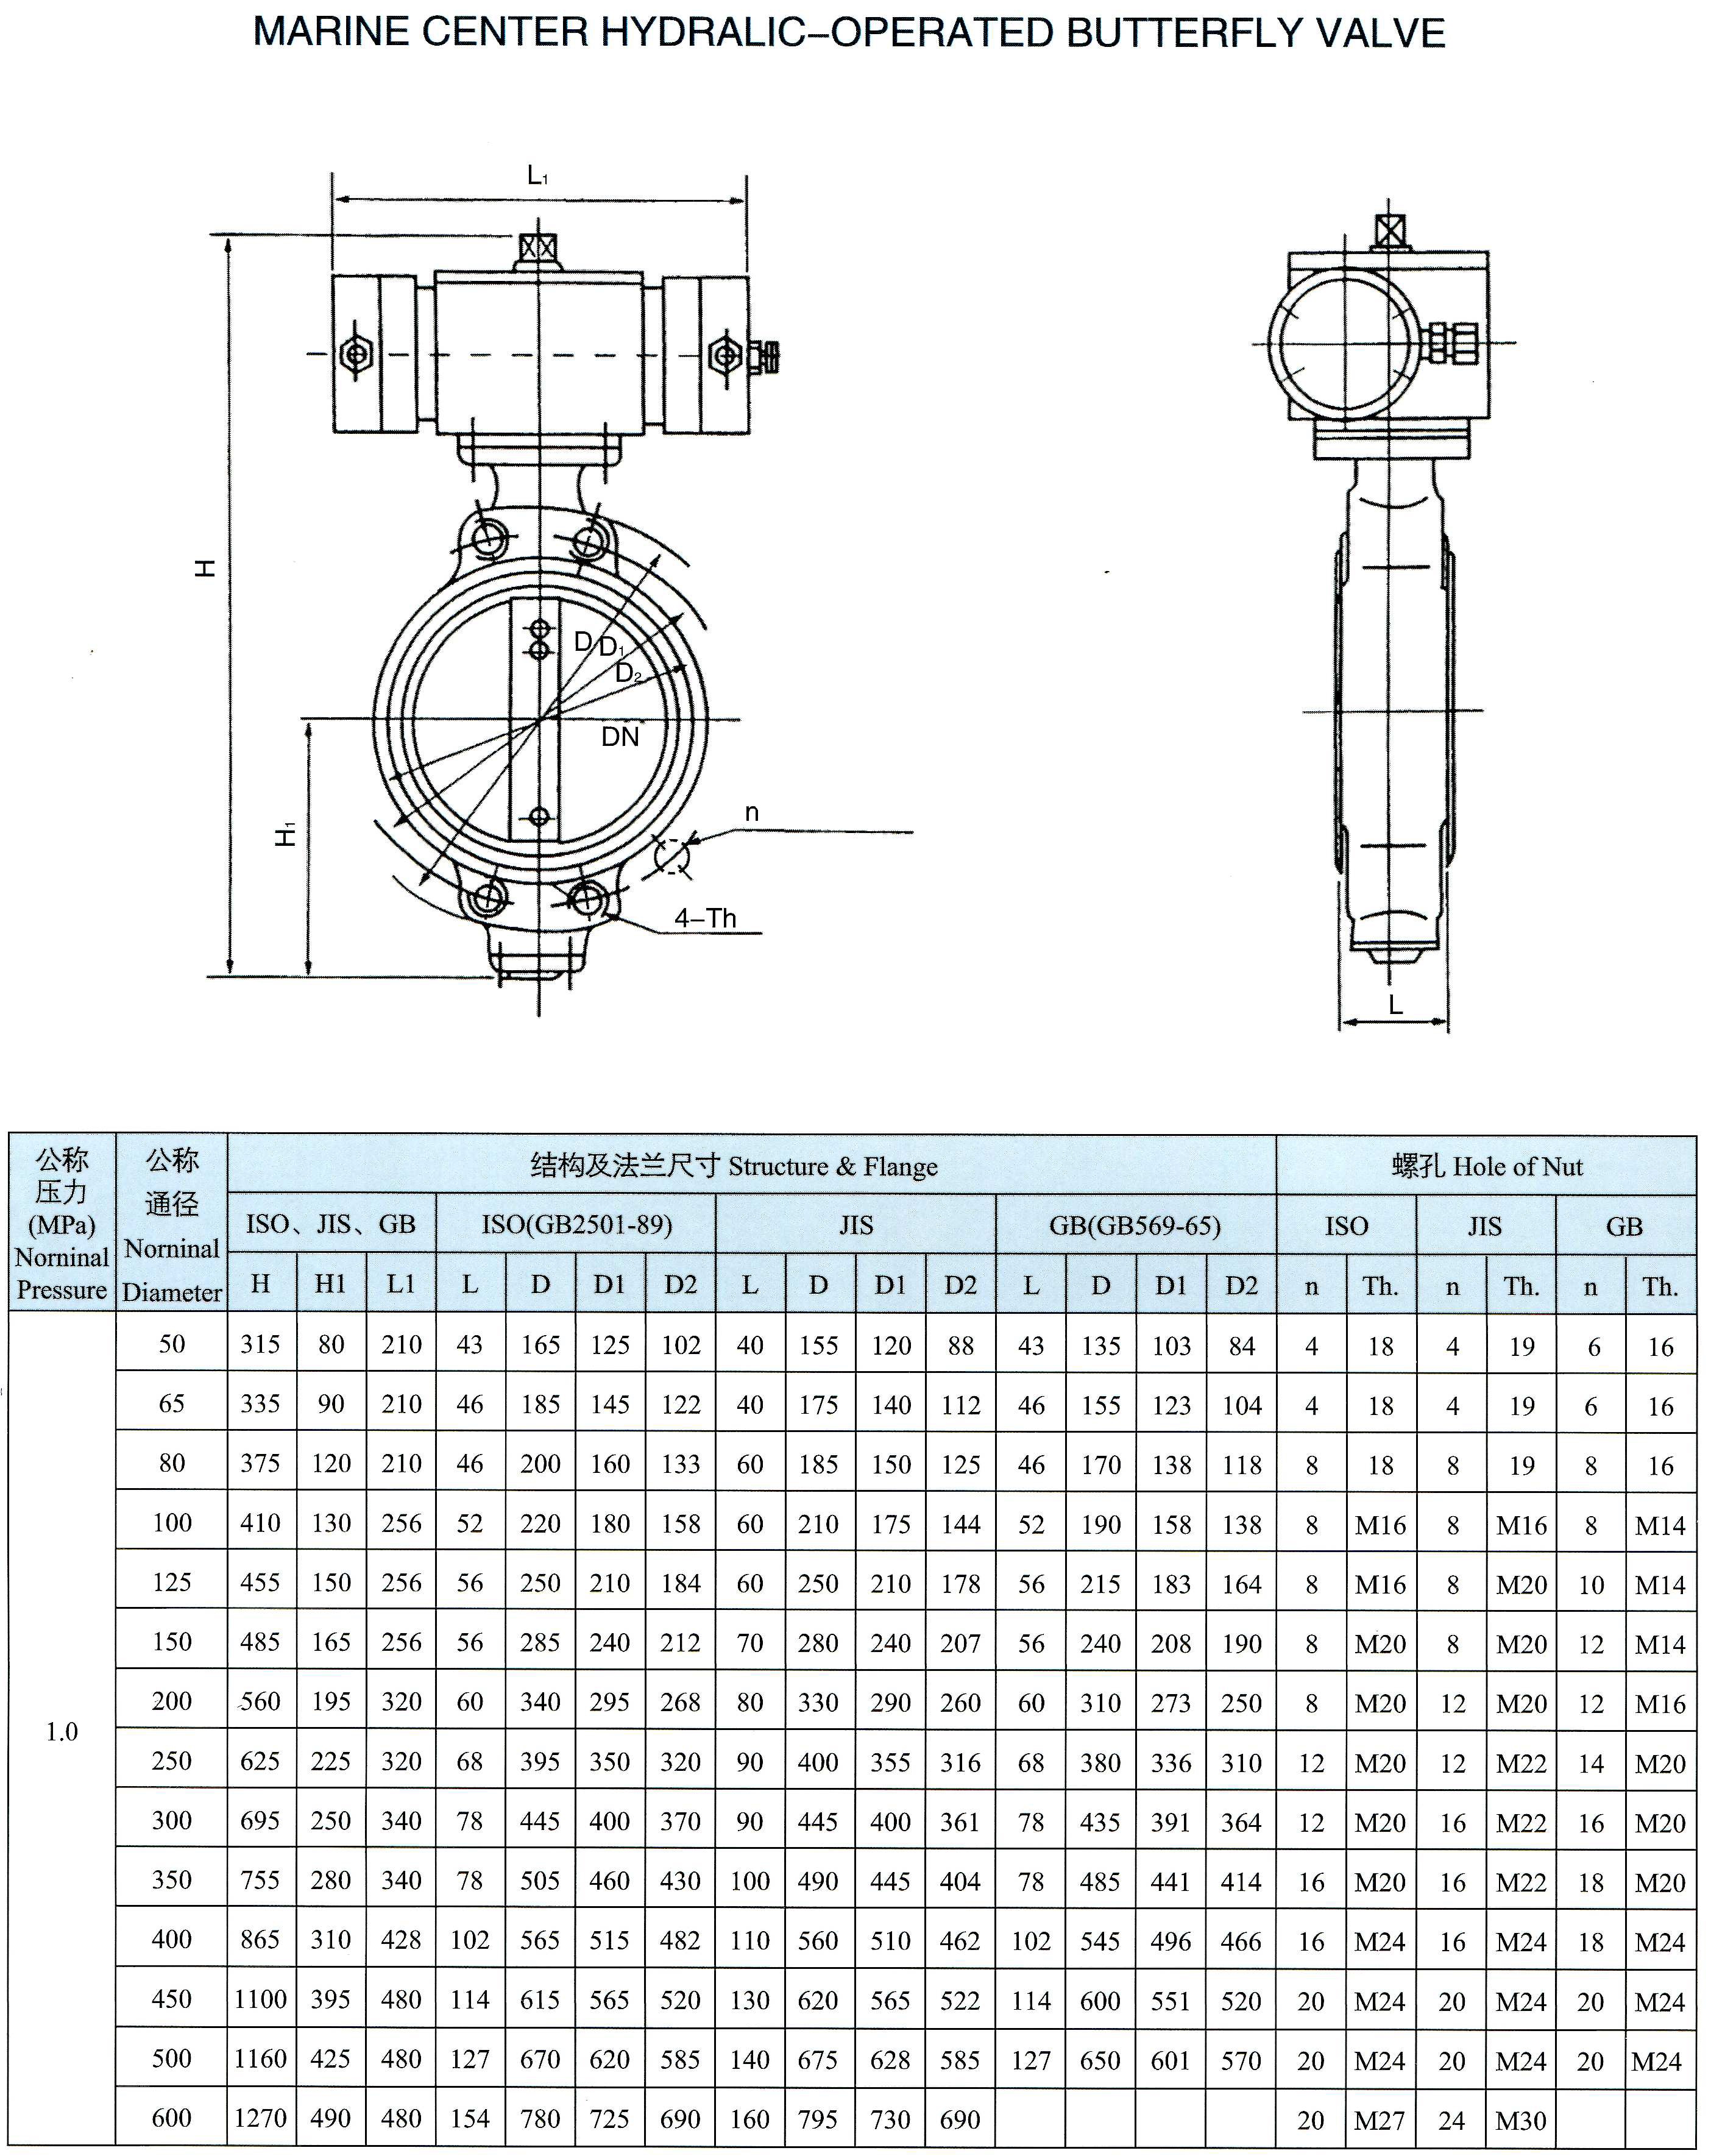 marine center hydraulic-operated butterfly valve